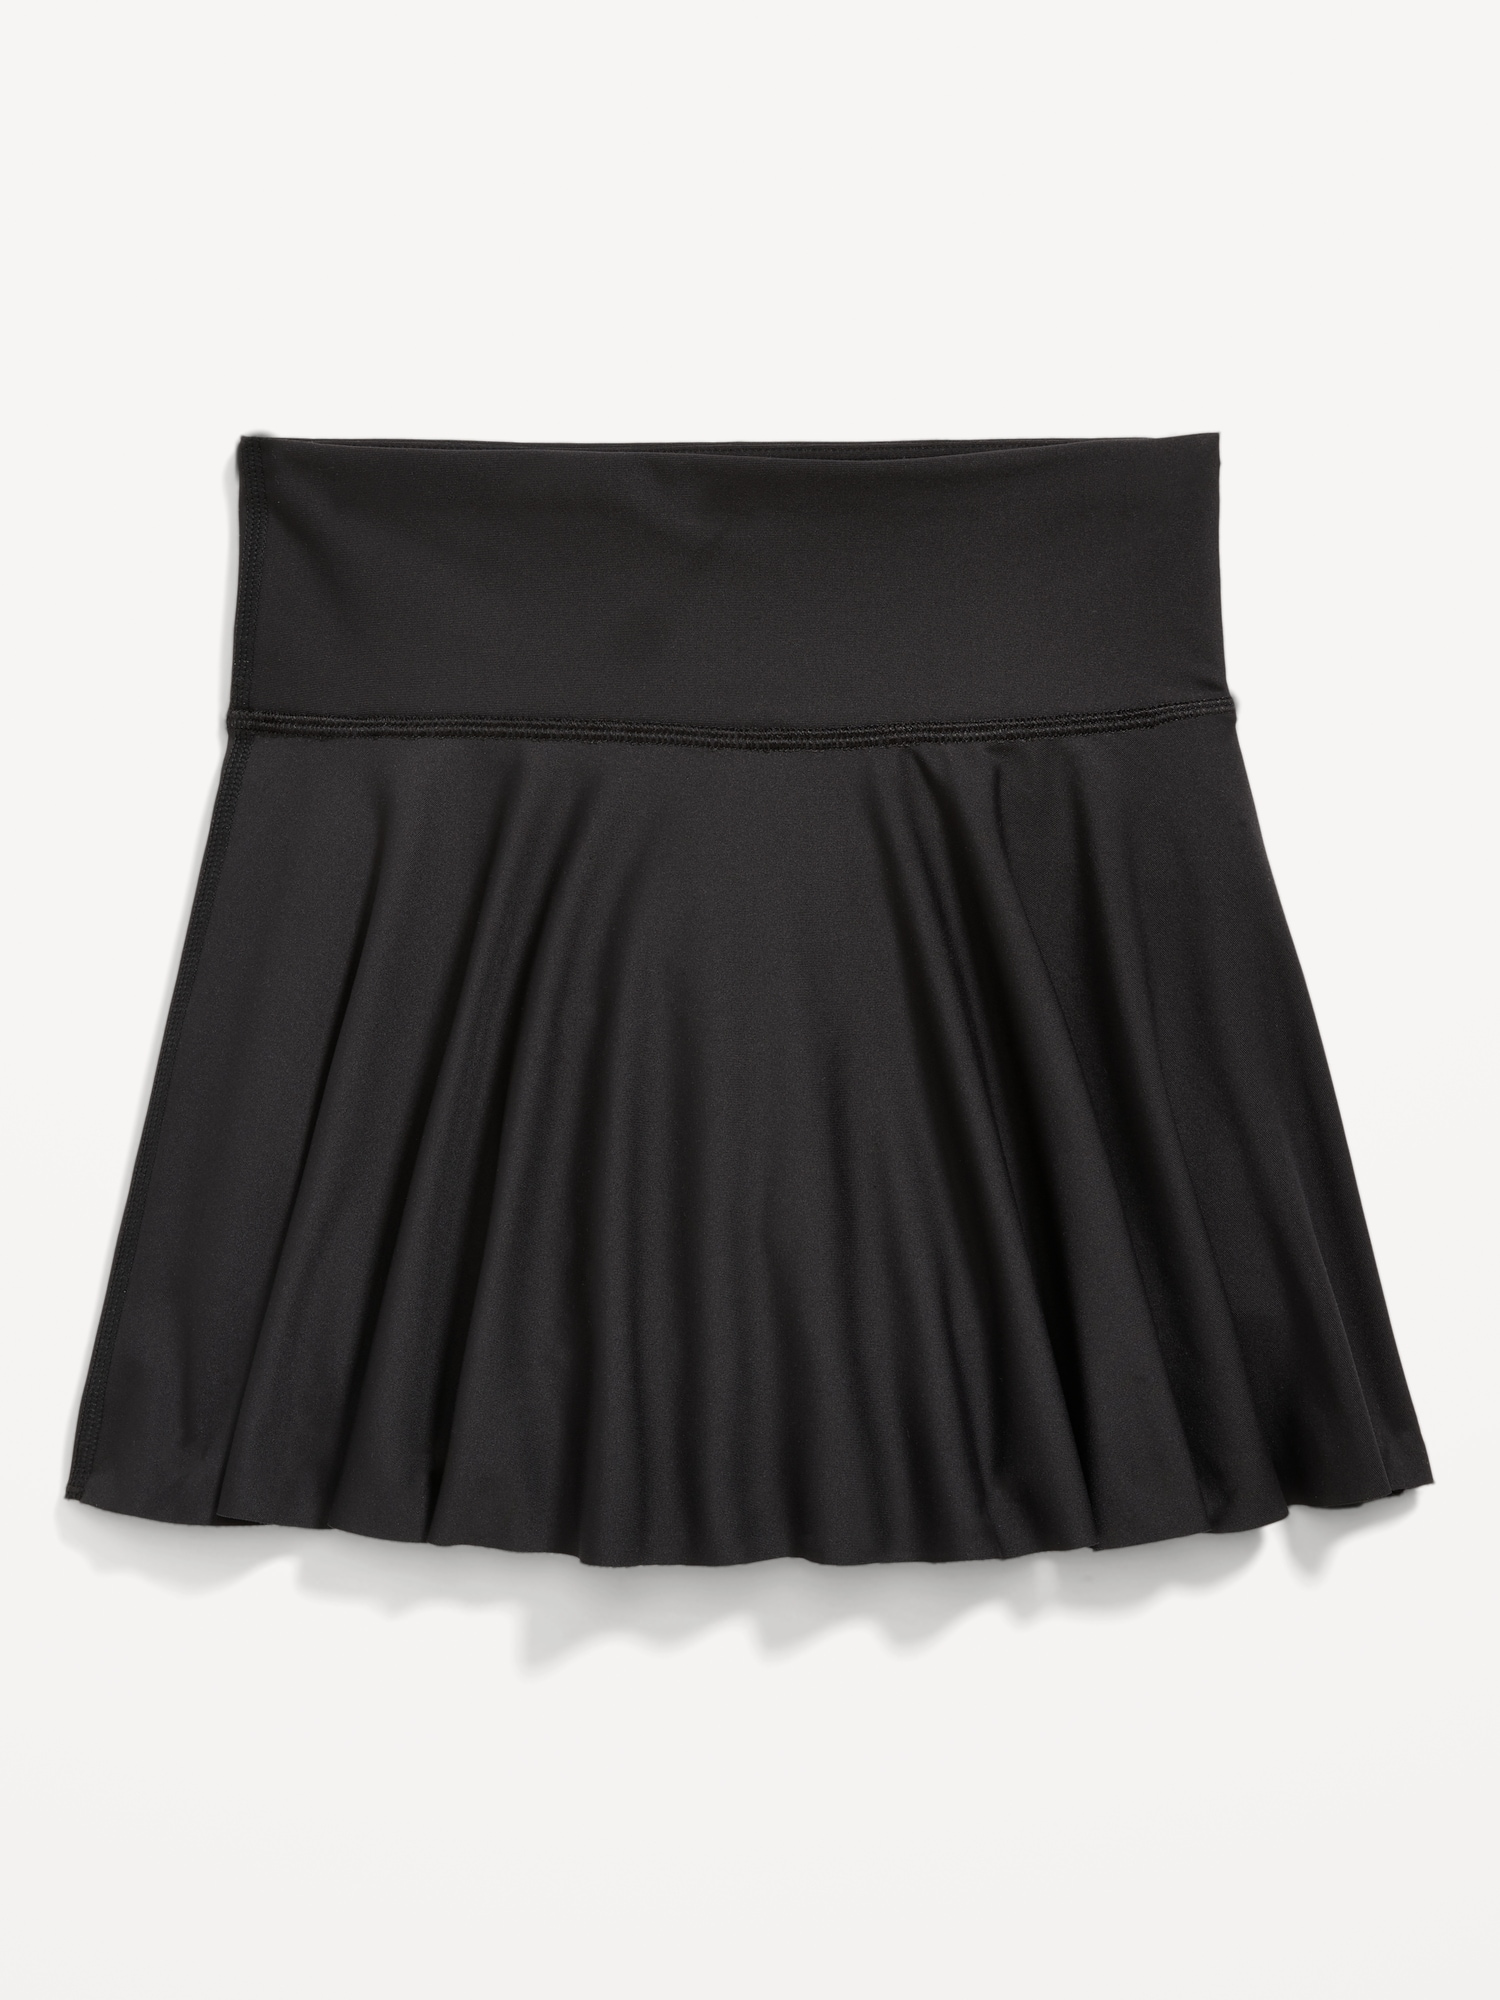 This Swim Skirt Is a Vacation Must-Have